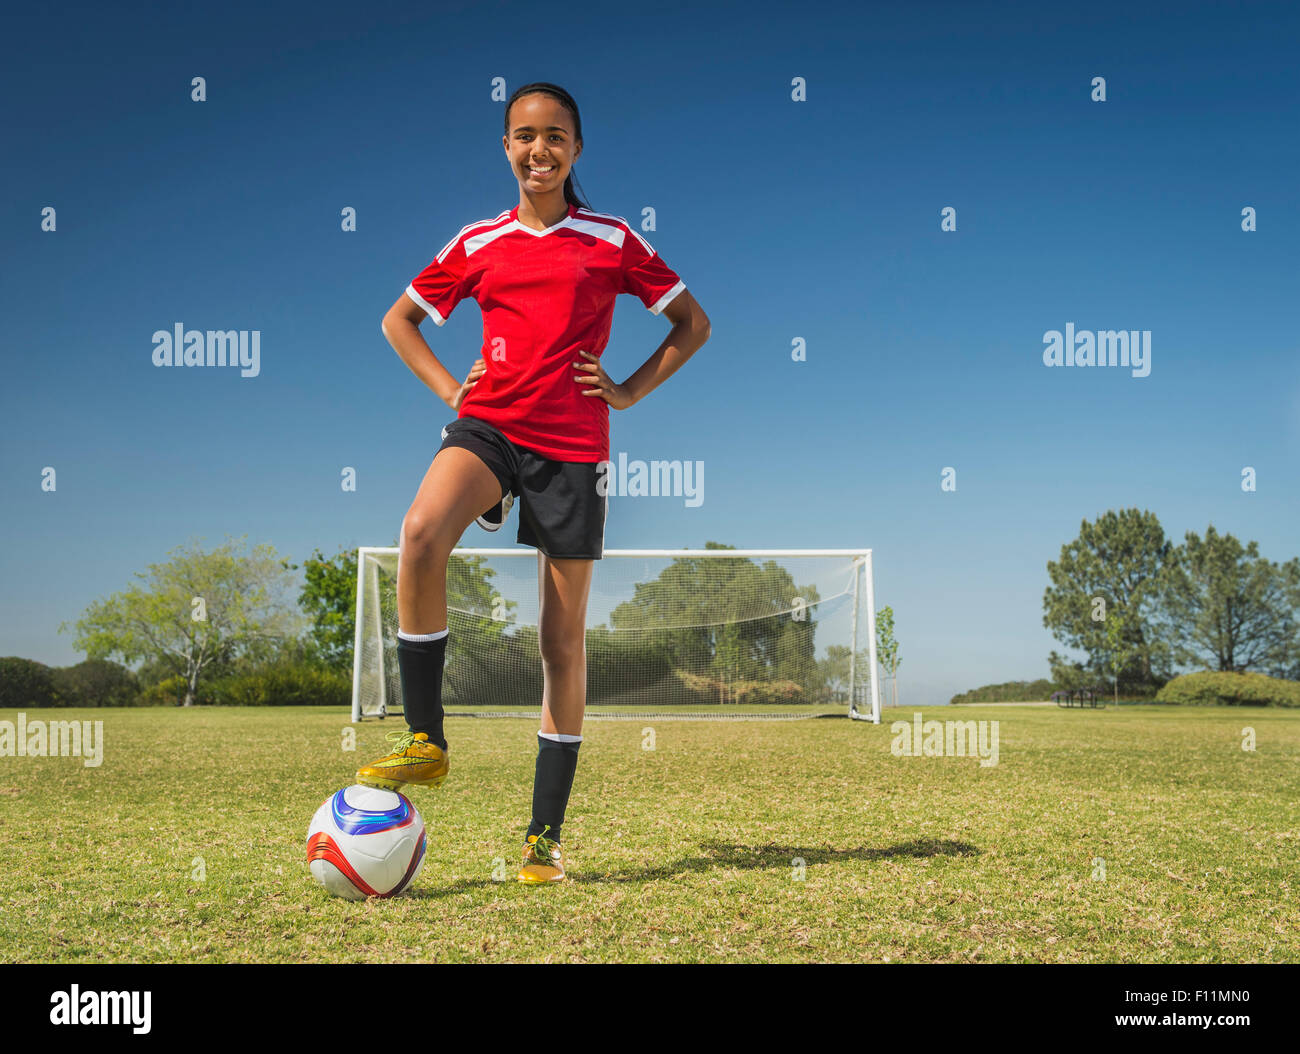 Mixed race soccer player standing on field Stock Photo